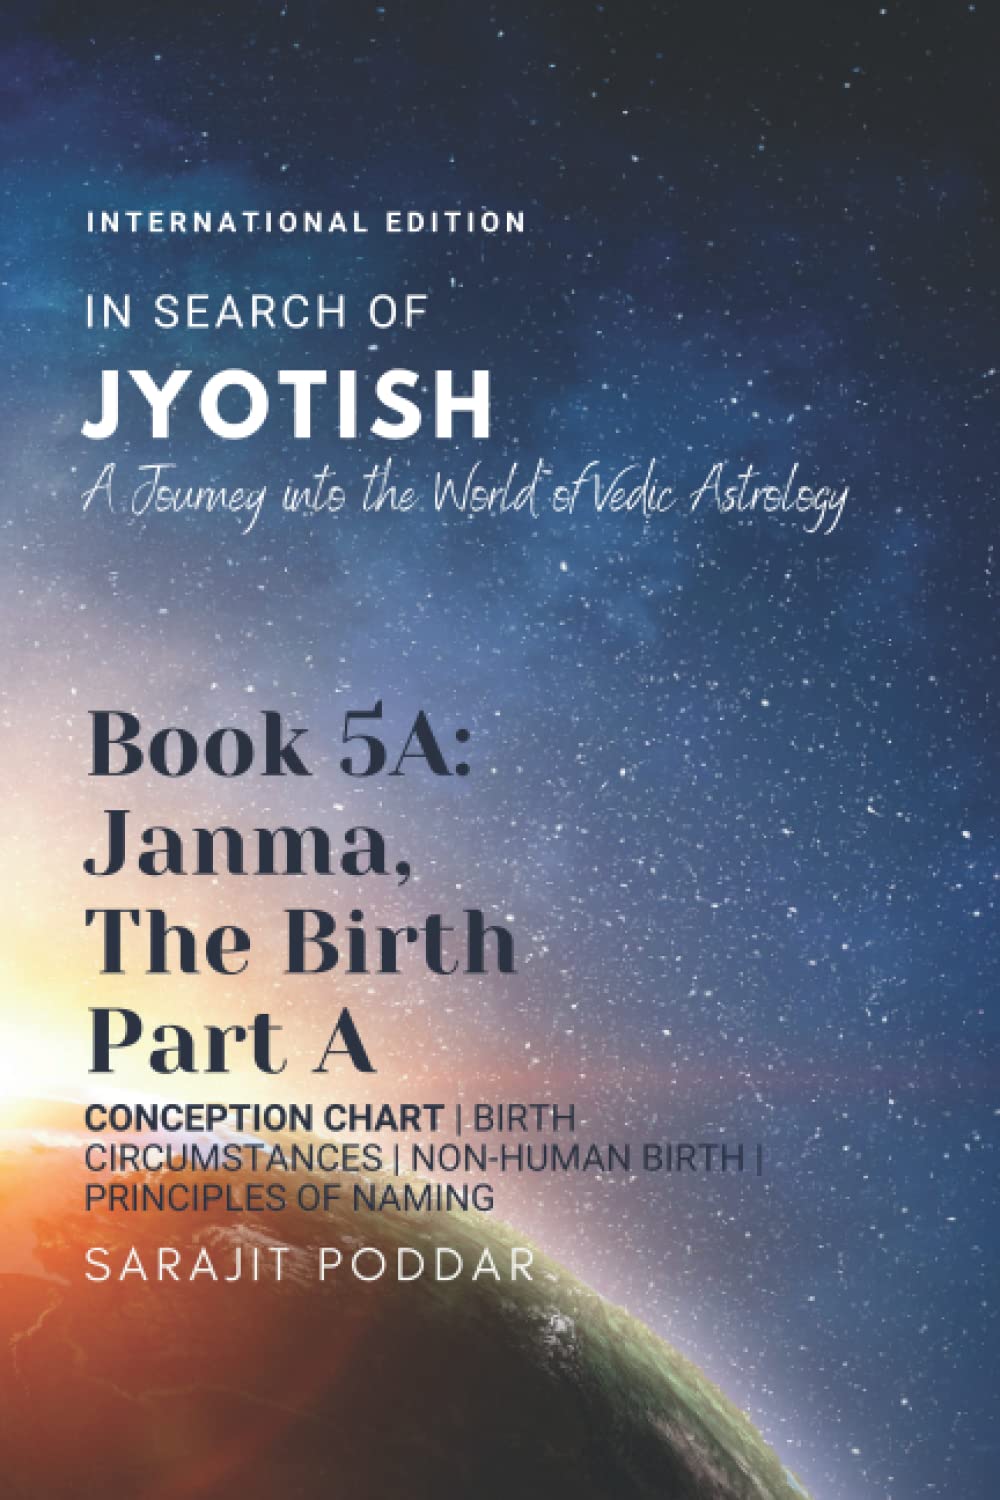 Janma, the Birth - Part A: A Journey into the World of Vedic Astrology